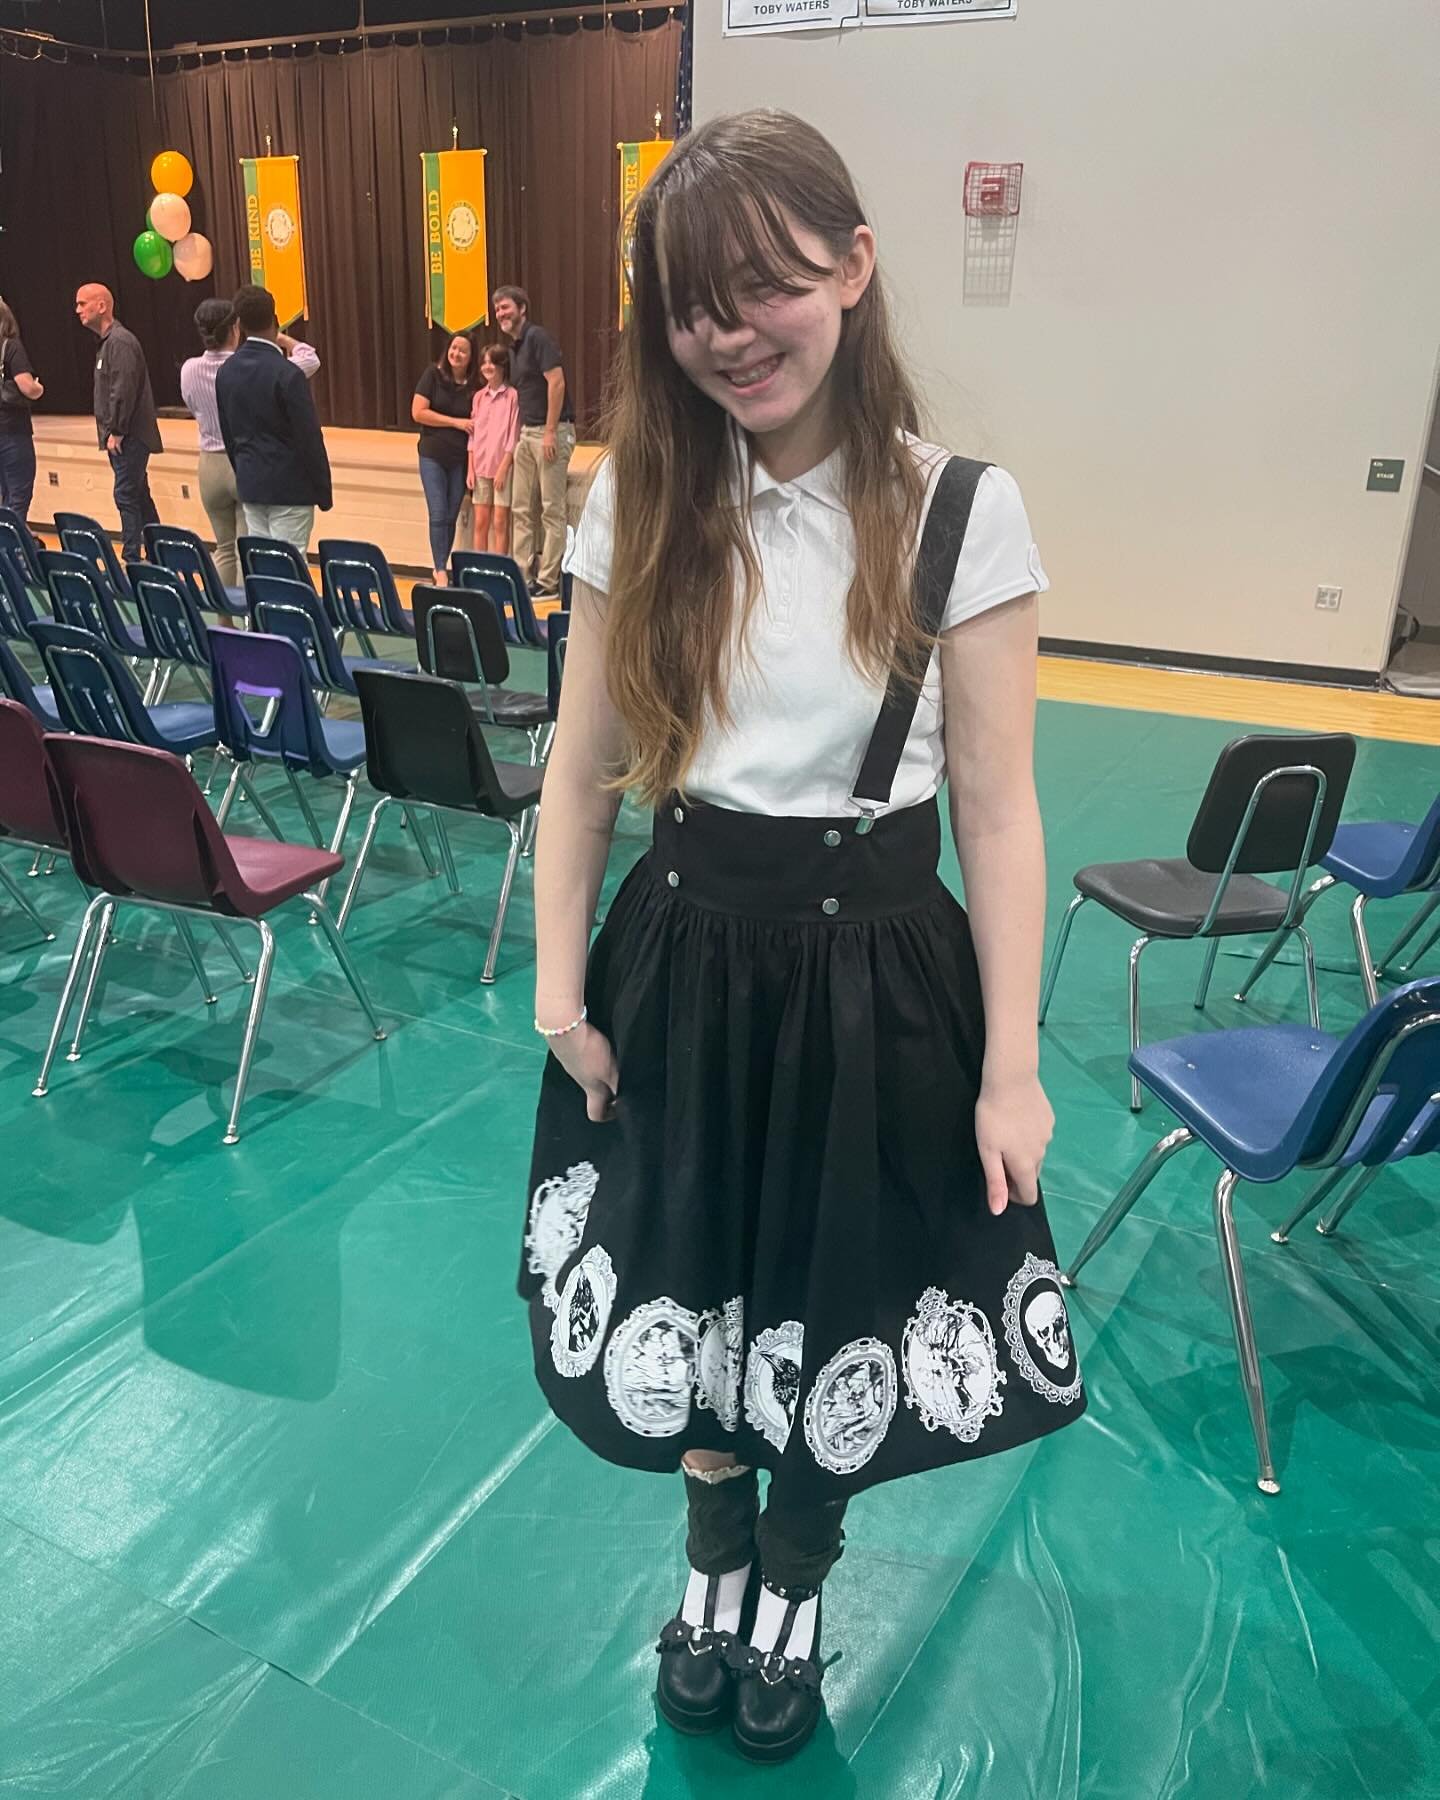 Congrats to my little goth baby for getting through sixth grade with 5/5 state test scores in math &amp; science, honor roll, and participation in her first ever musical. We are all so proud of you!